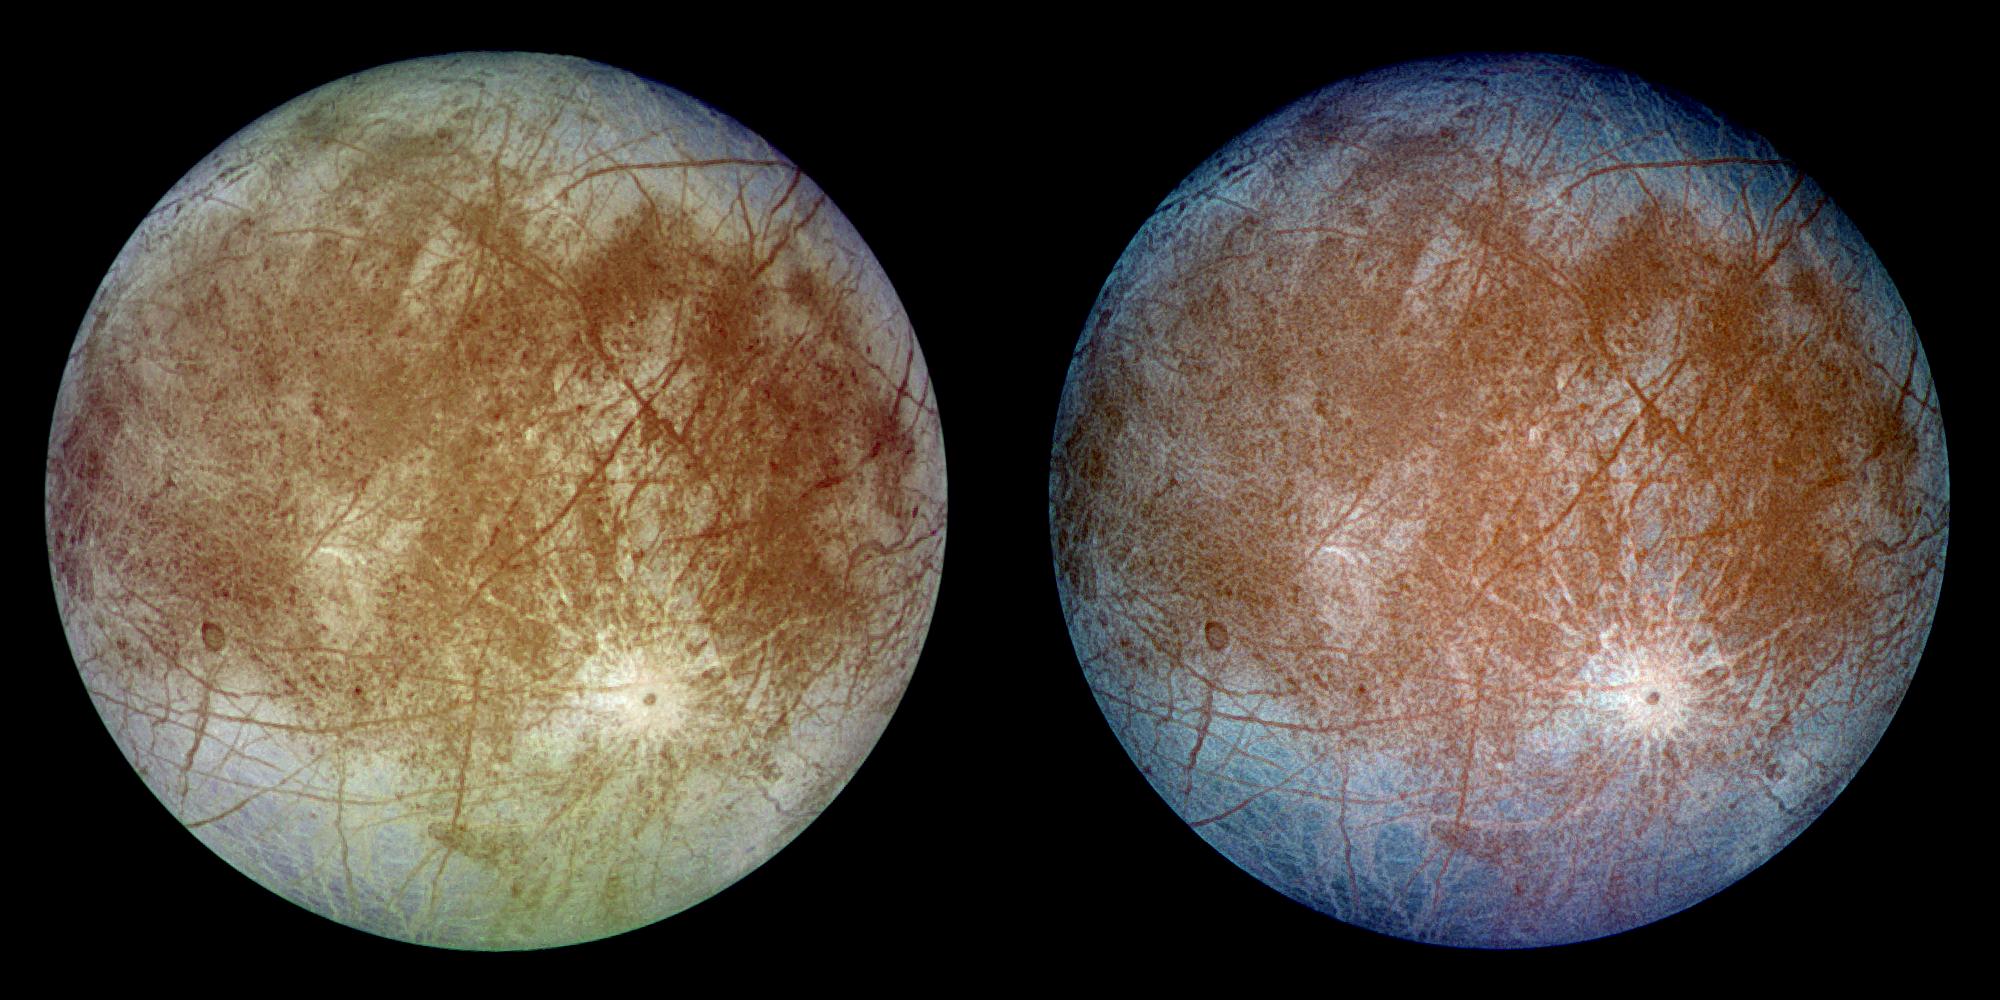 This image shows two views of the trailing hemisphere of Jupiter's ice-covered satellite, Europa.